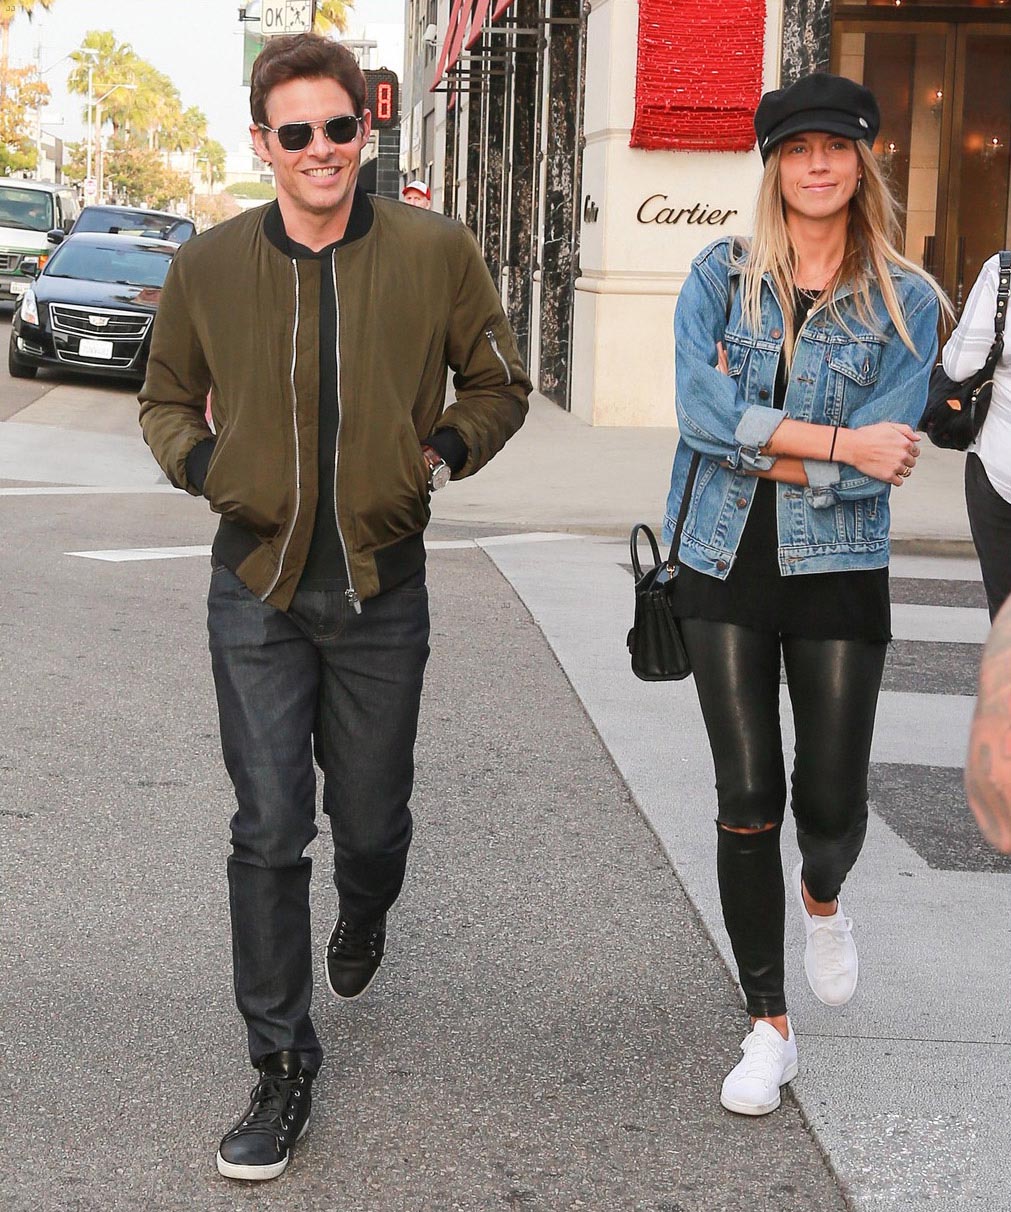 Edei was spotted shopping around town